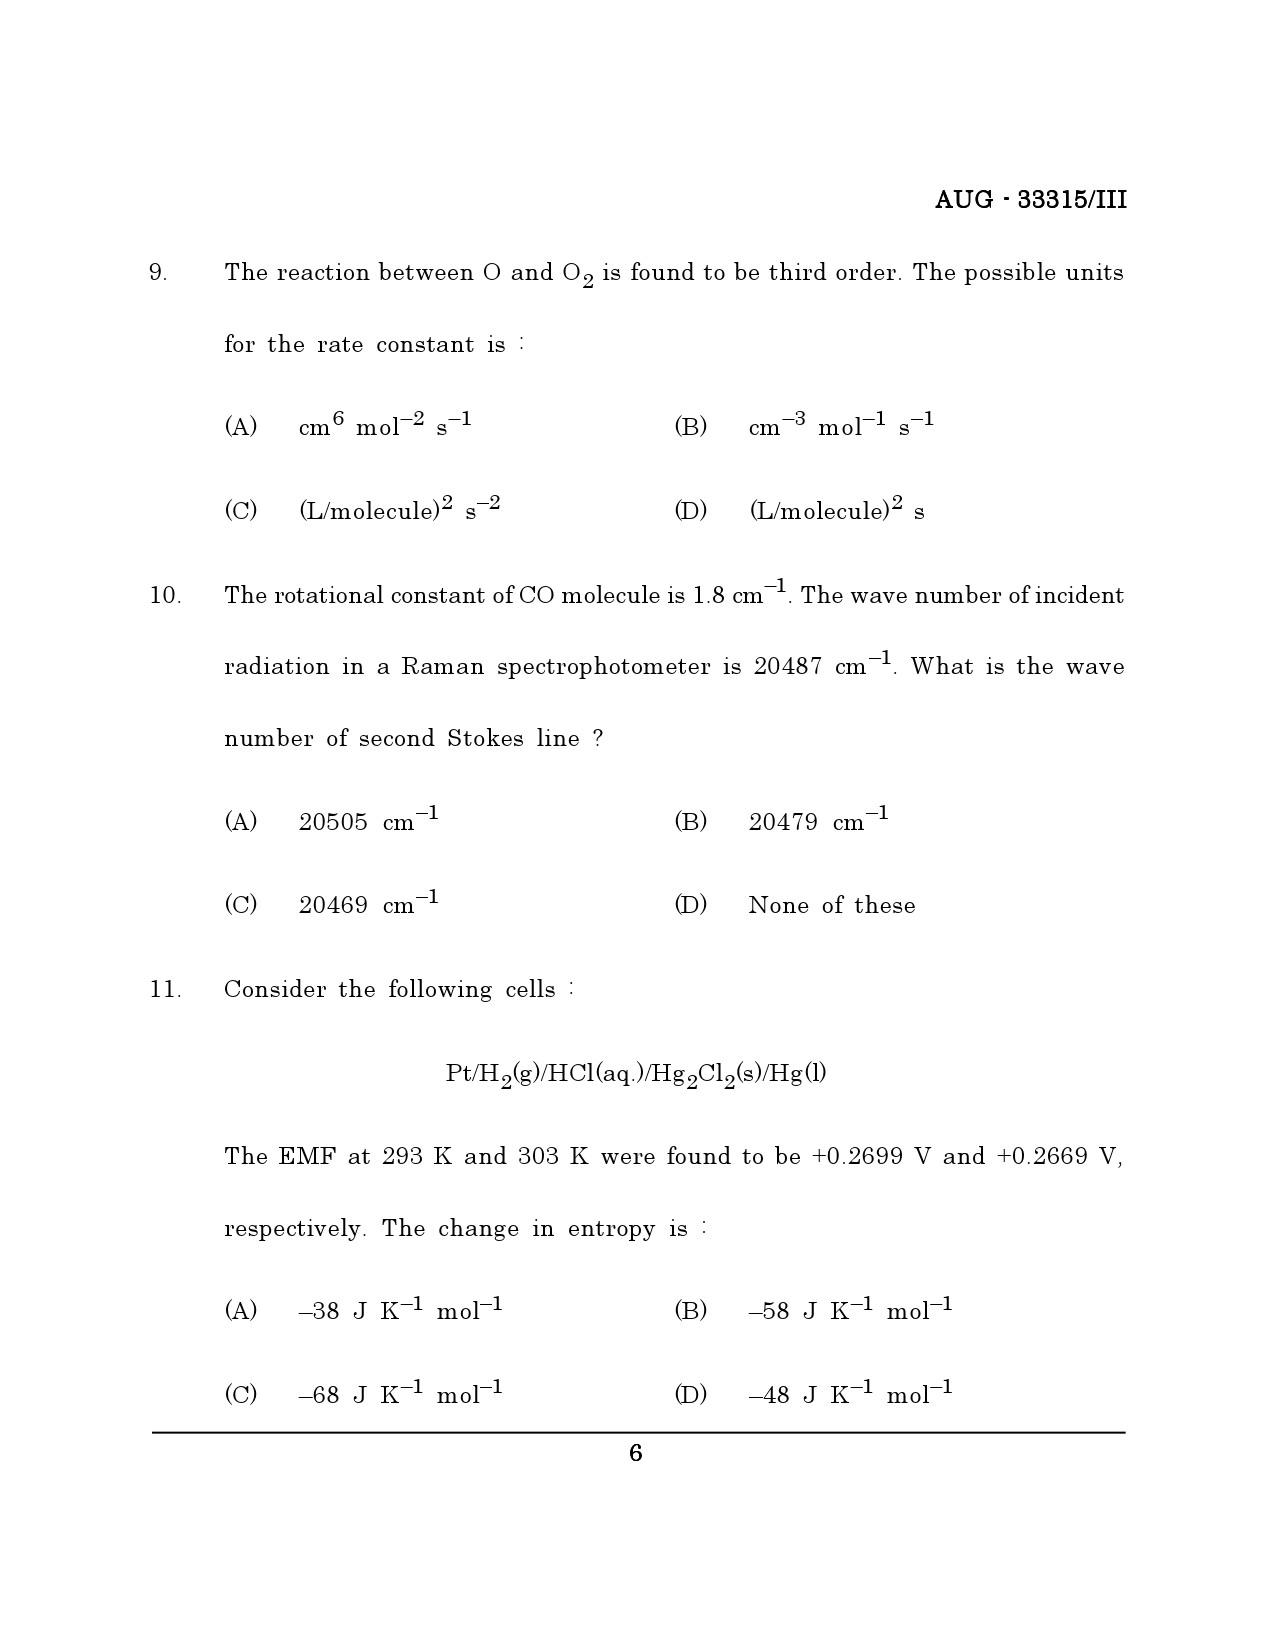 Maharashtra SET Chemical Sciences Question Paper III August 2015 5